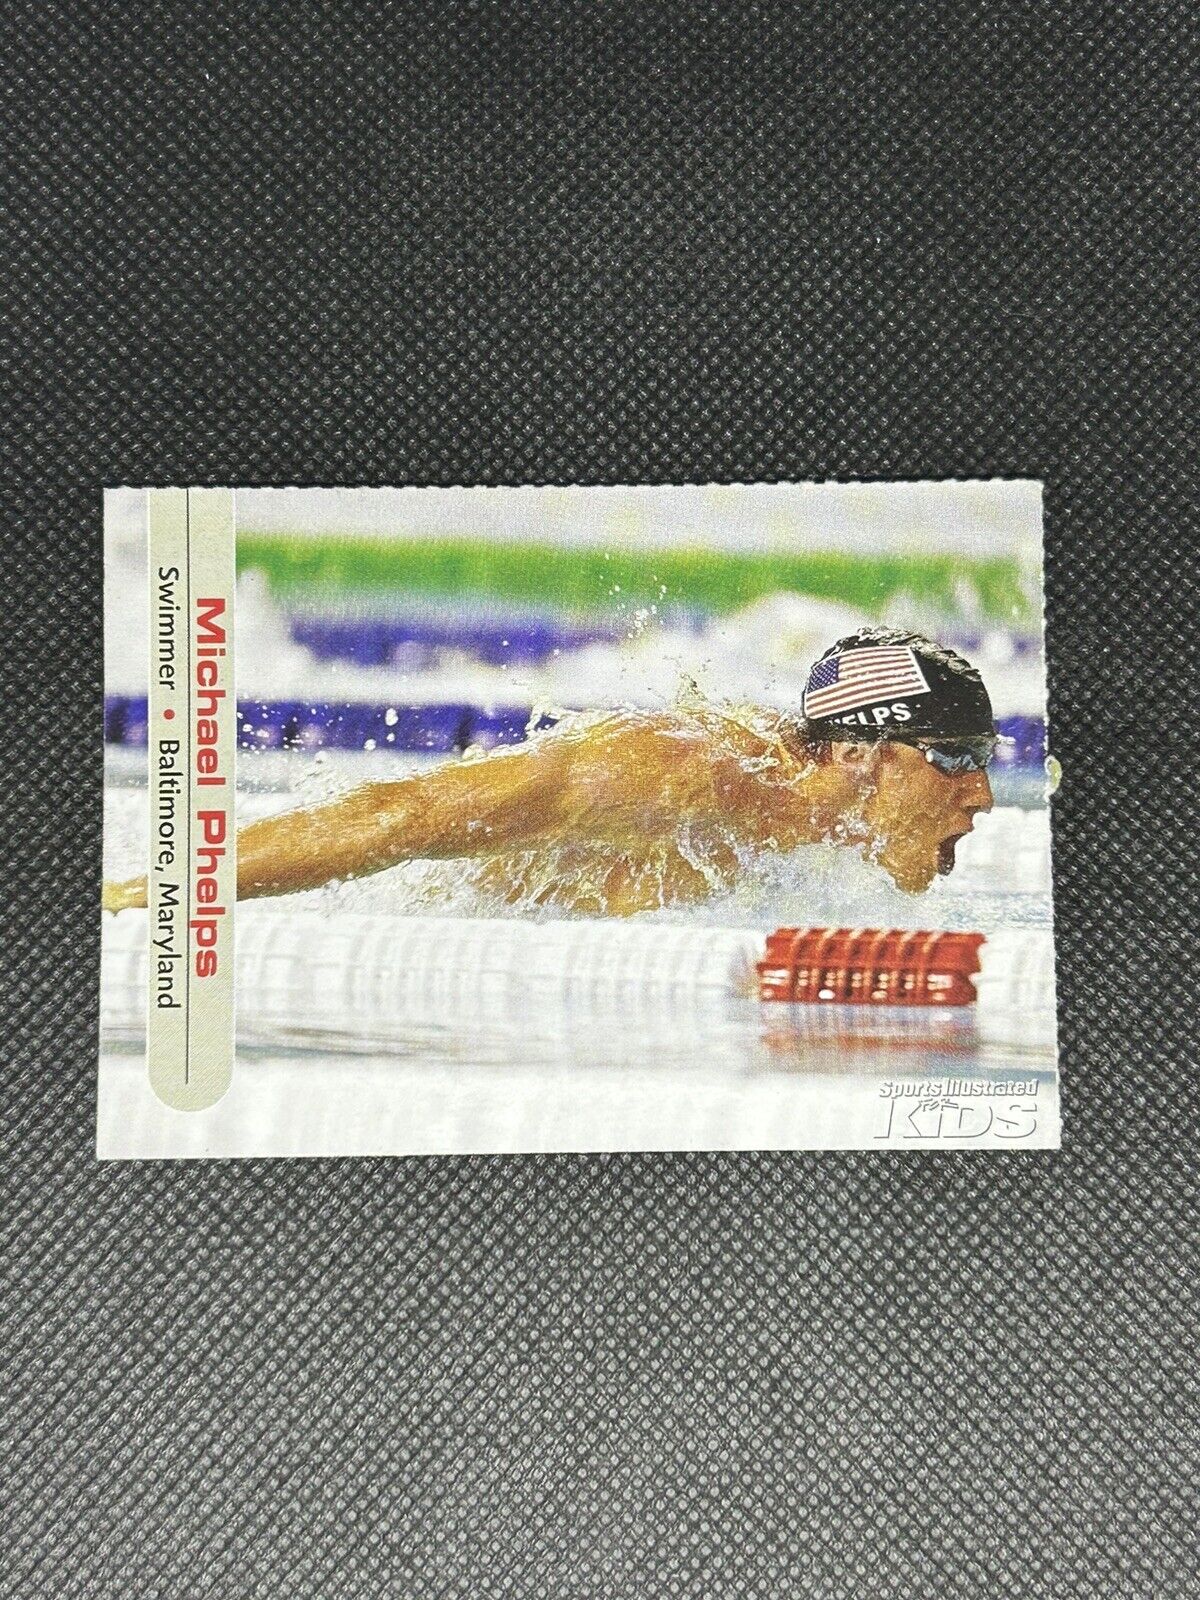 Michael Phelps Rookie Card 2004 Sports Illustrated For Kids Team USA #360 RARE🔥